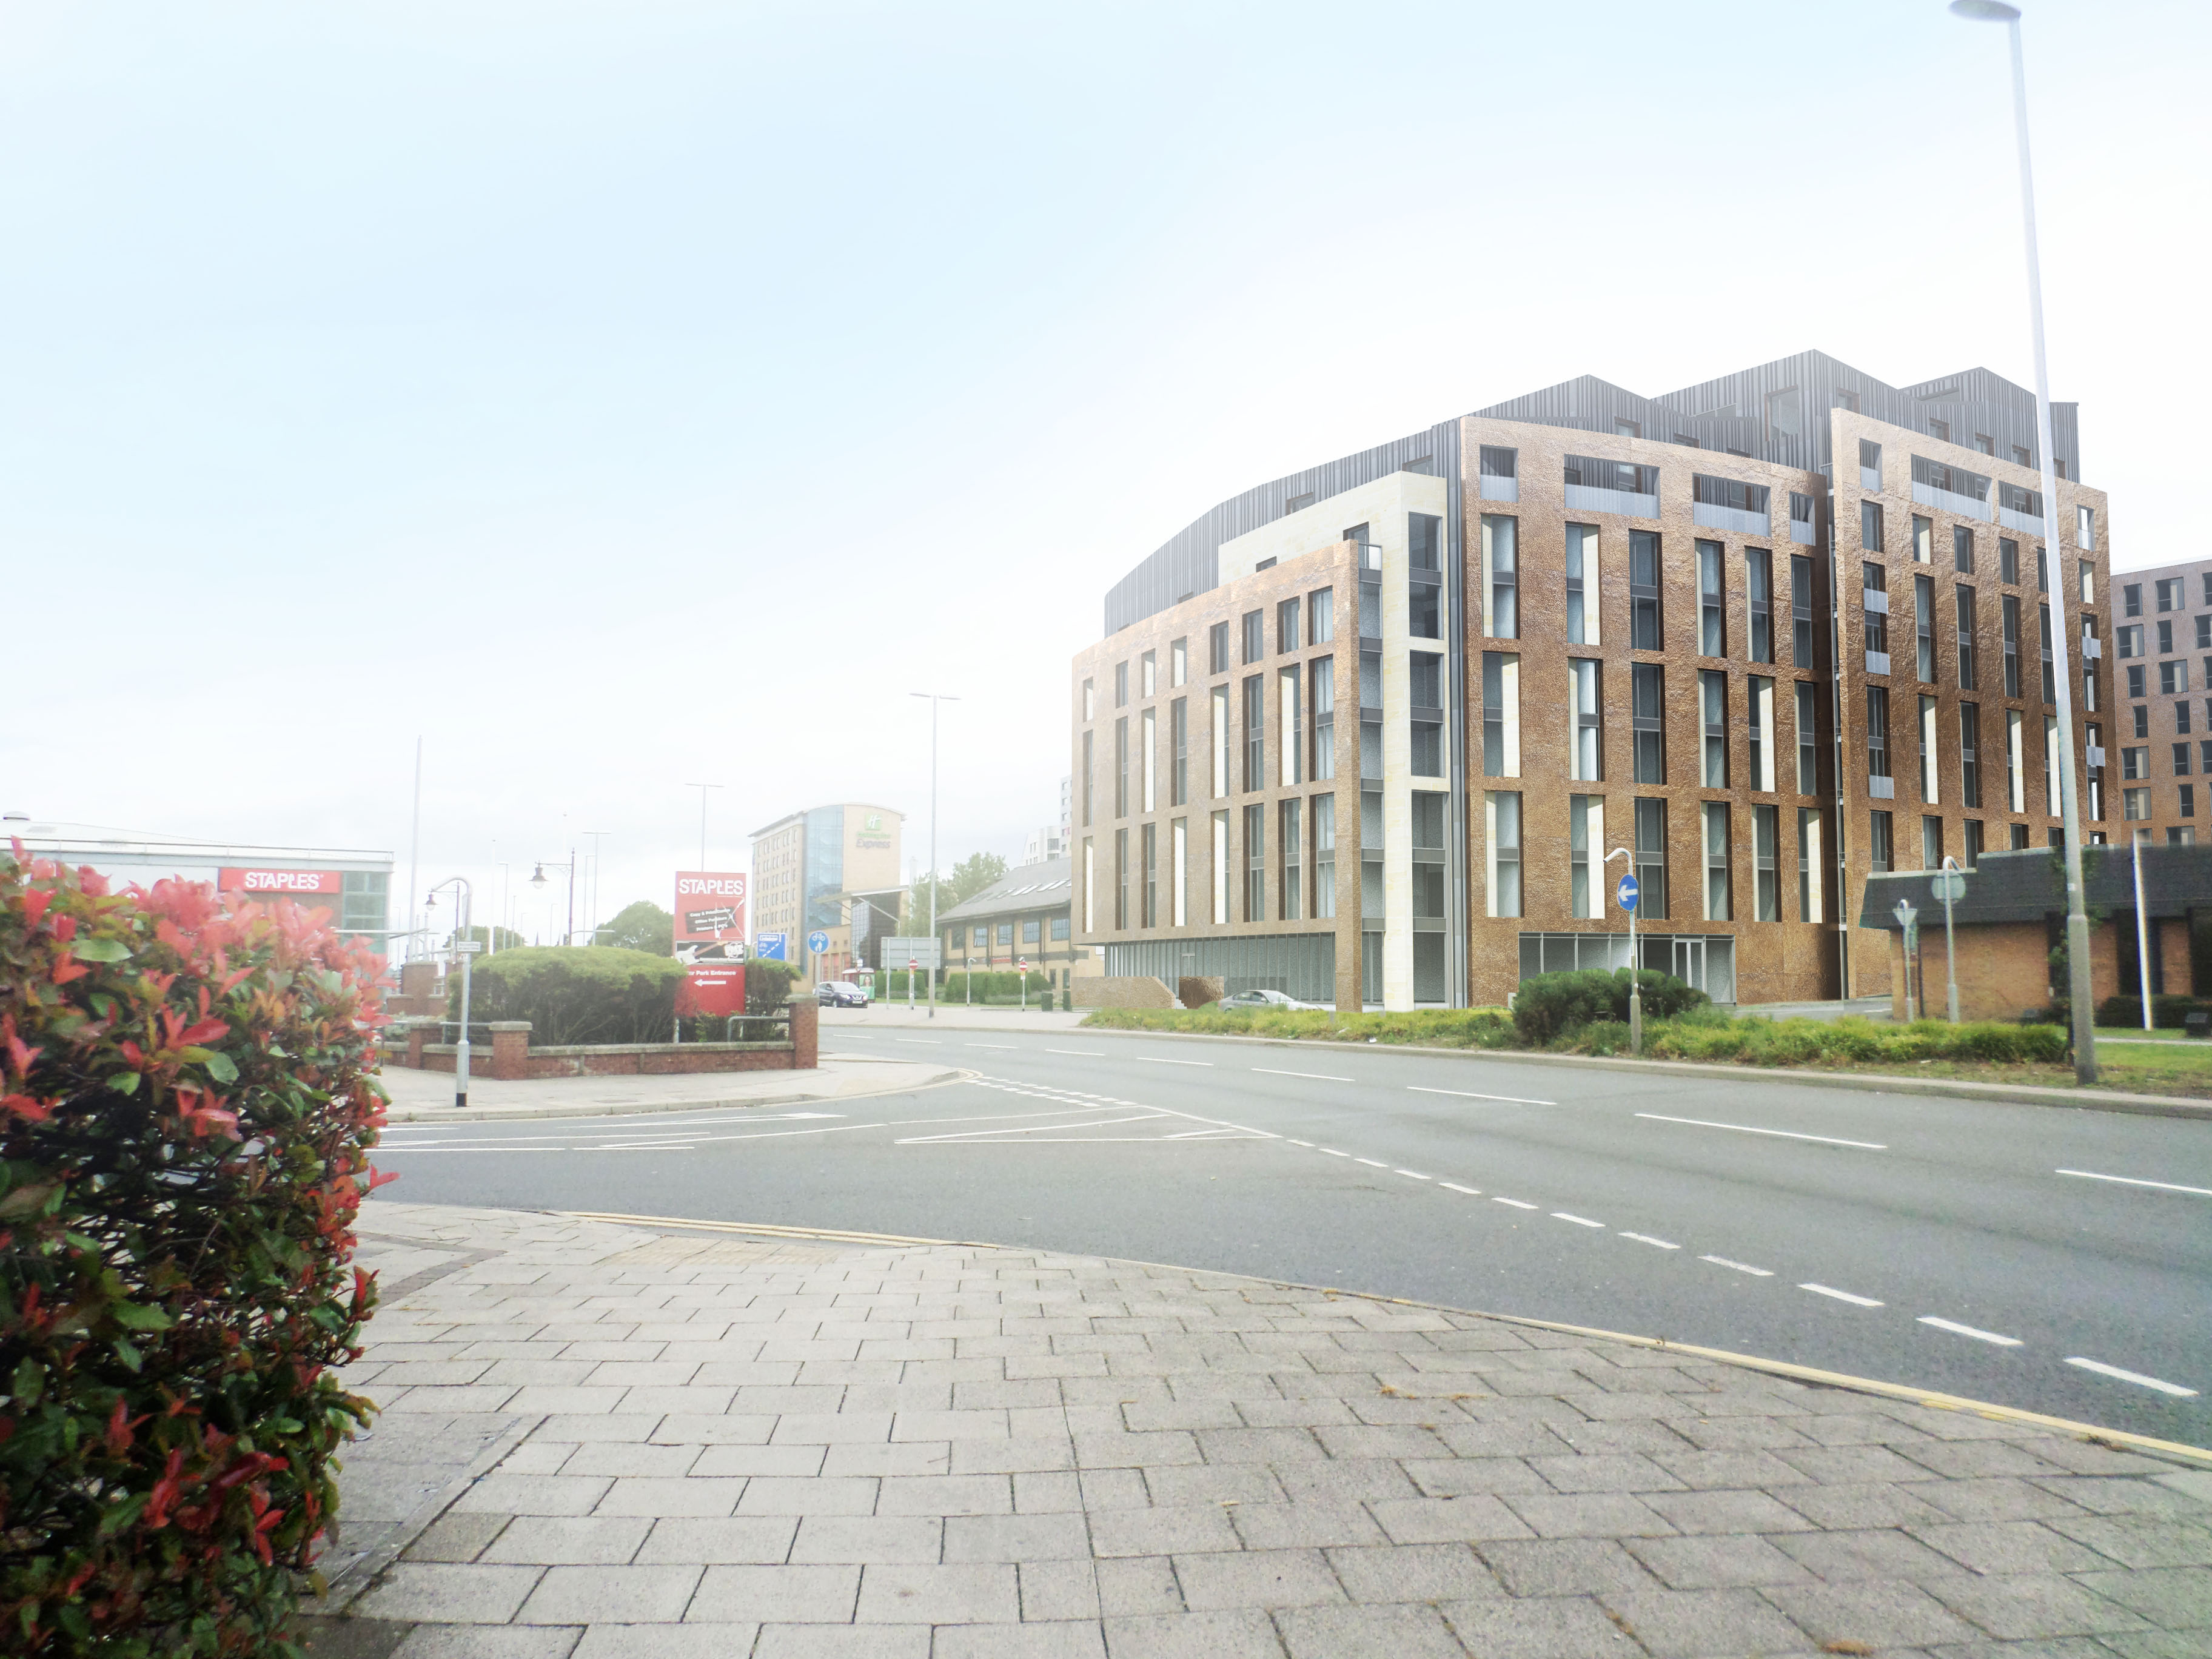 KMRE’s Kirkstall Road development is underway after selling for £17.25m